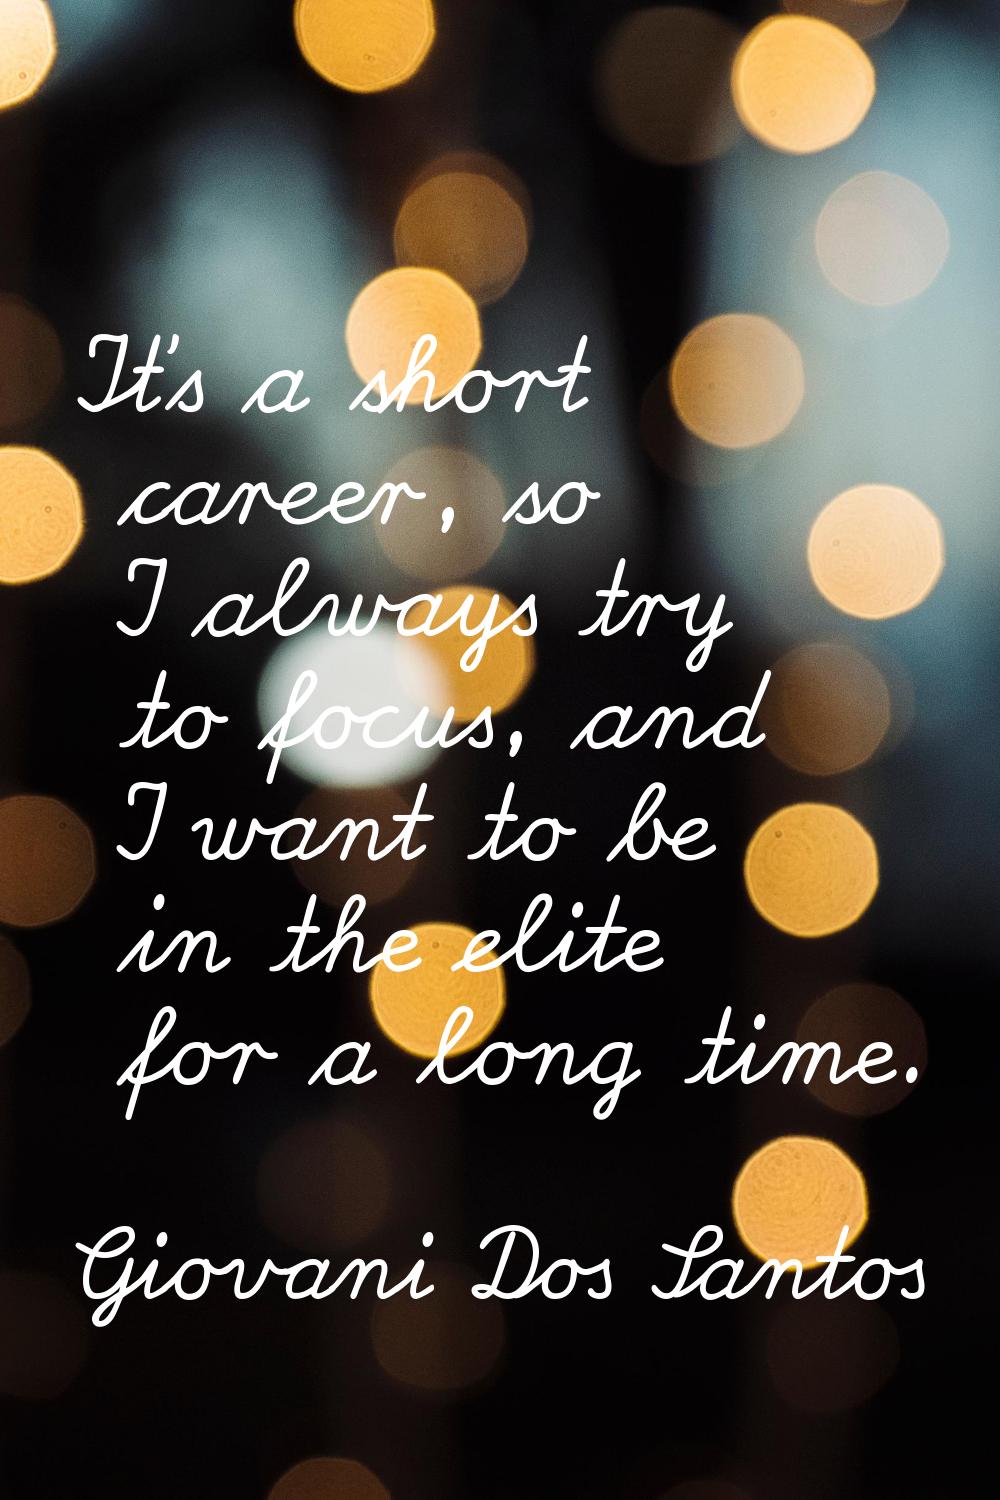 It's a short career, so I always try to focus, and I want to be in the elite for a long time.